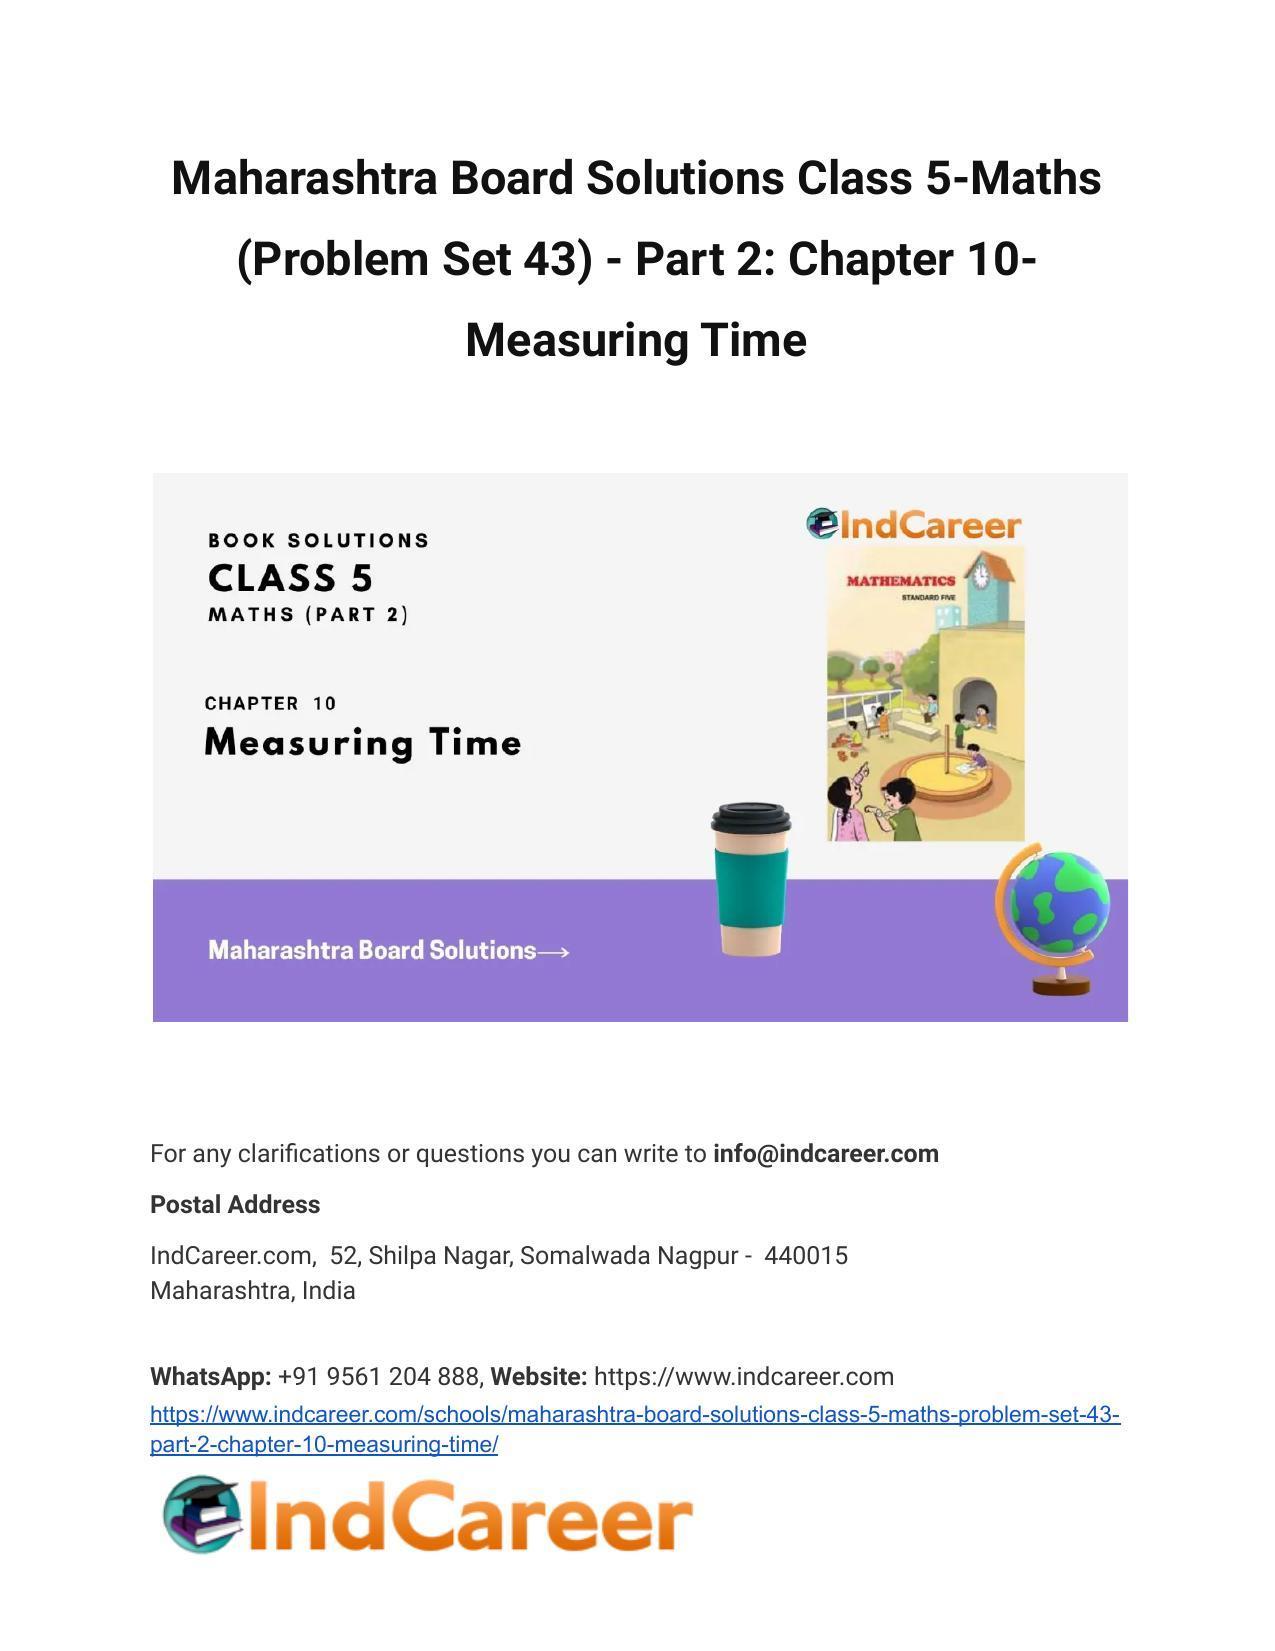 Maharashtra Board Solutions Class 5-Maths (Problem Set 43) - Part 2: Chapter 10- Measuring Time - Page 1